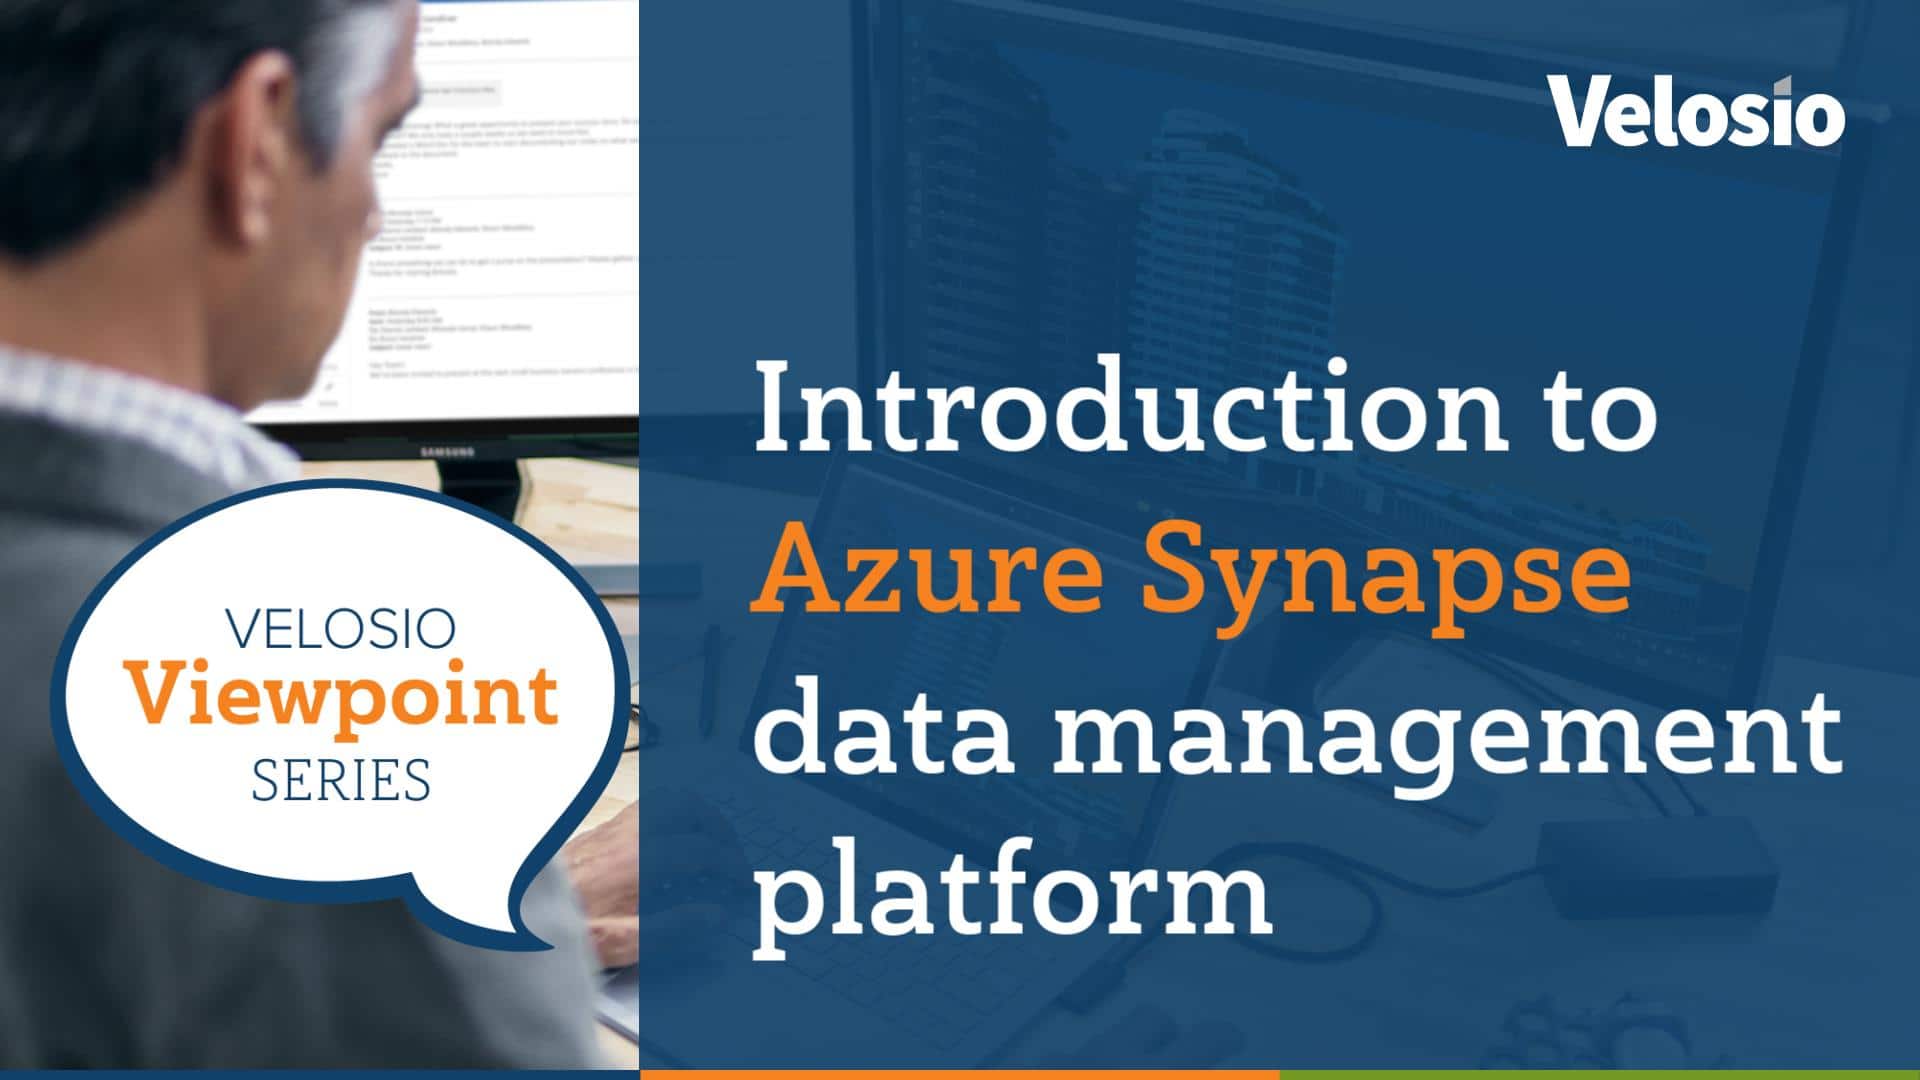 Azure Synapse Overview by Velosio